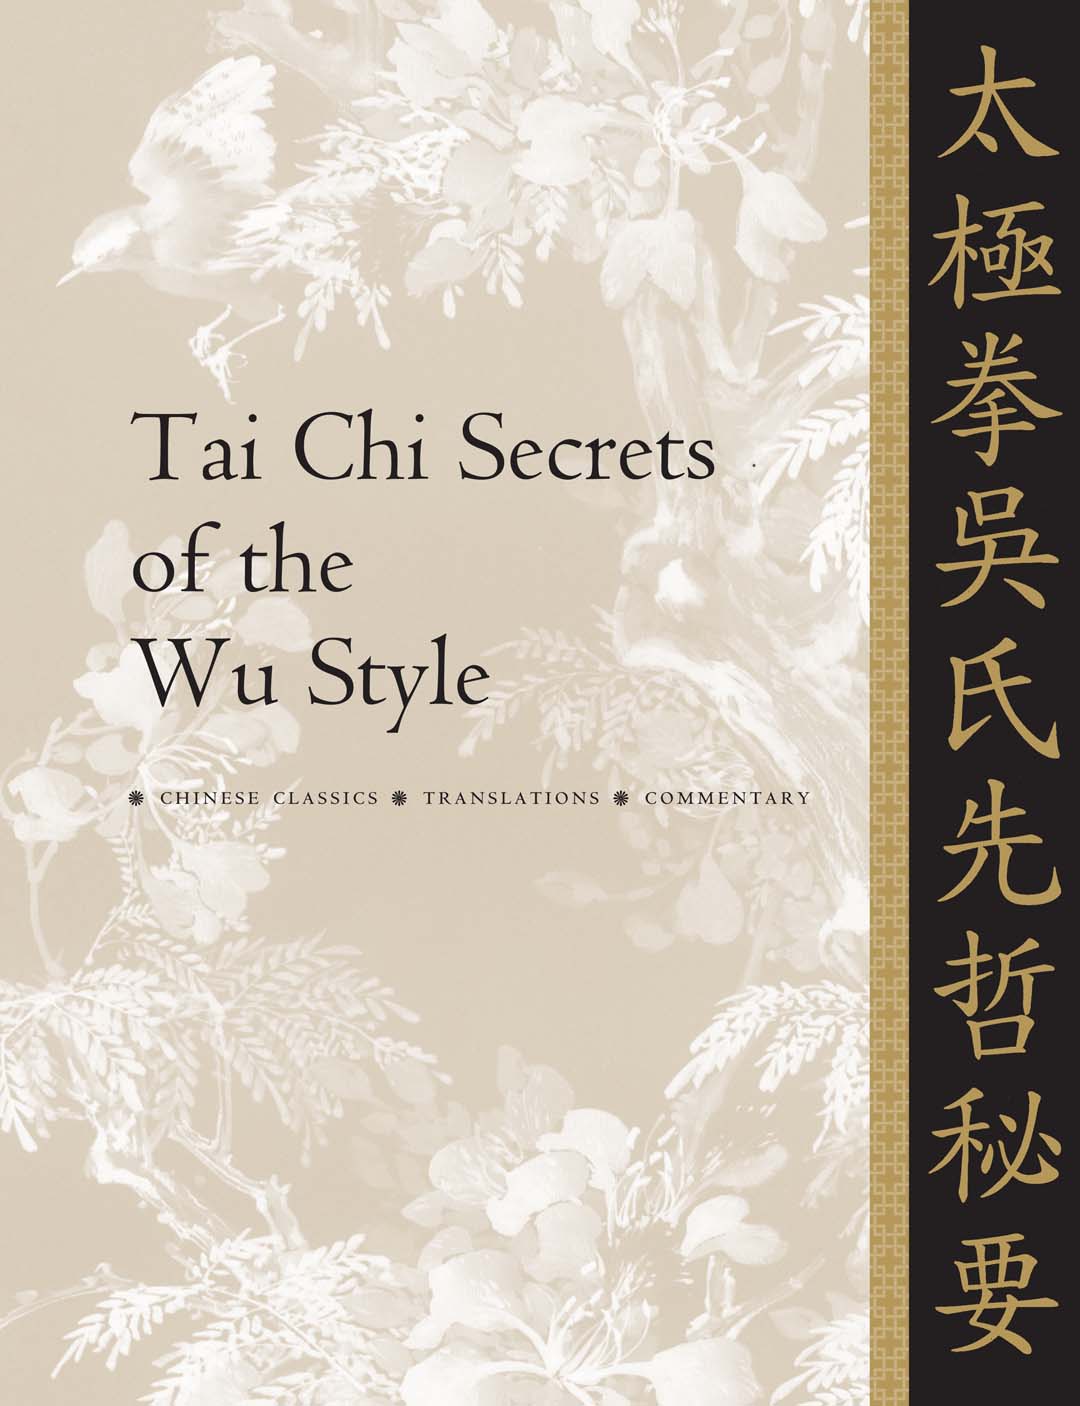 Tai Chi Secrets of the Wu Style—Chinese Classics, Translations, Commentary Book by Dr Yang, Jwing-Ming